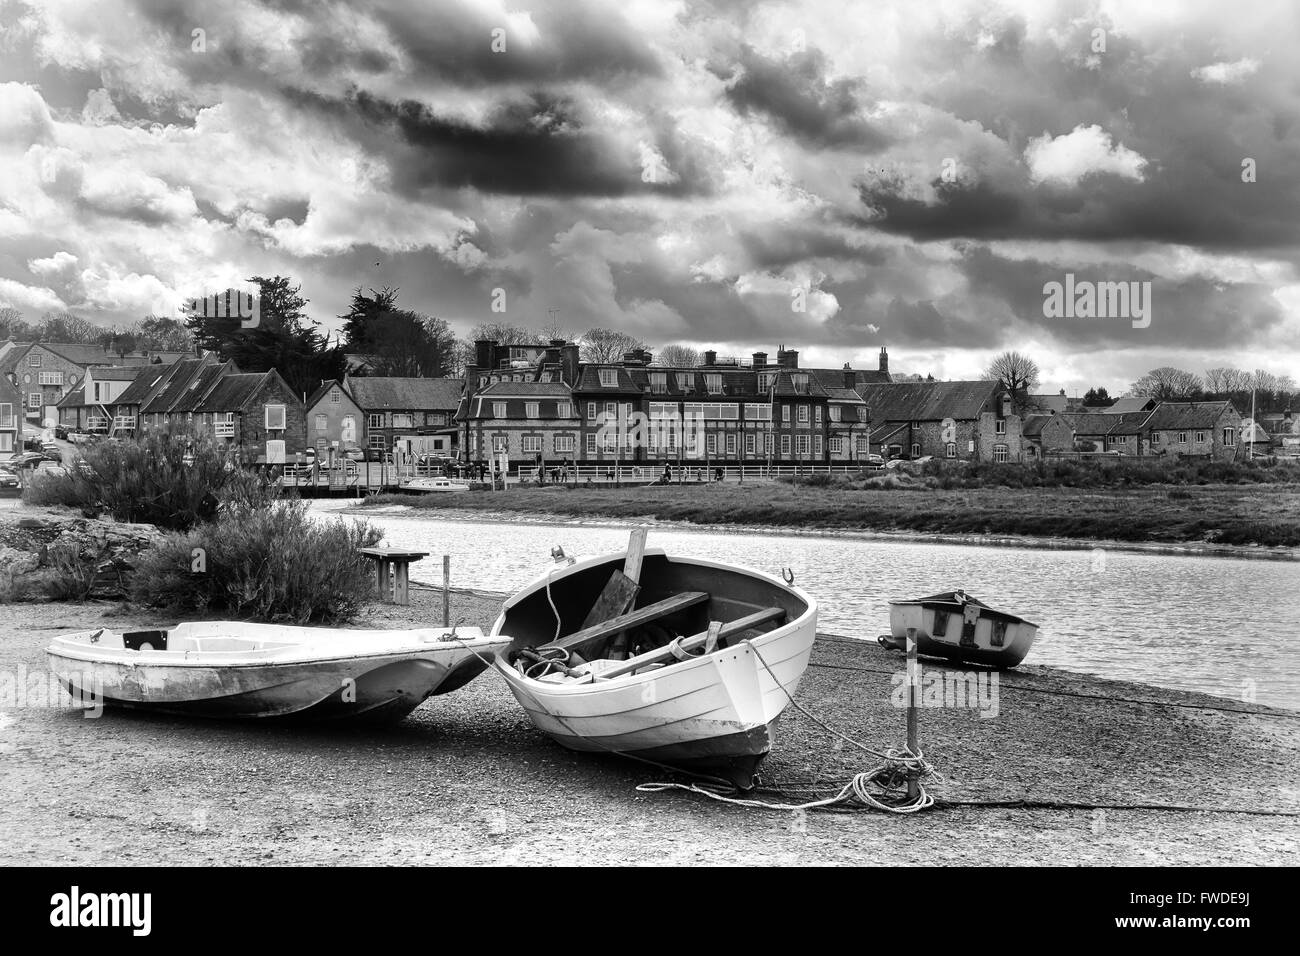 The Blakeney Hotel and harbour, North Norfolk. Stock Photo